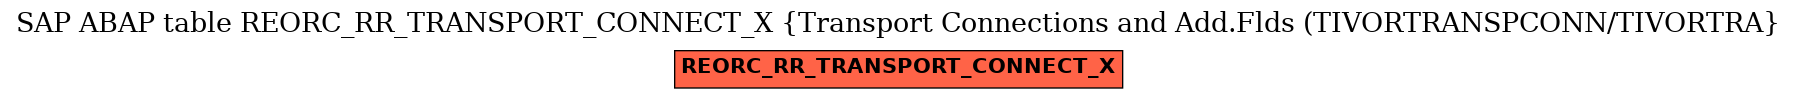 E-R Diagram for table REORC_RR_TRANSPORT_CONNECT_X (Transport Connections and Add.Flds (TIVORTRANSPCONN/TIVORTRA)